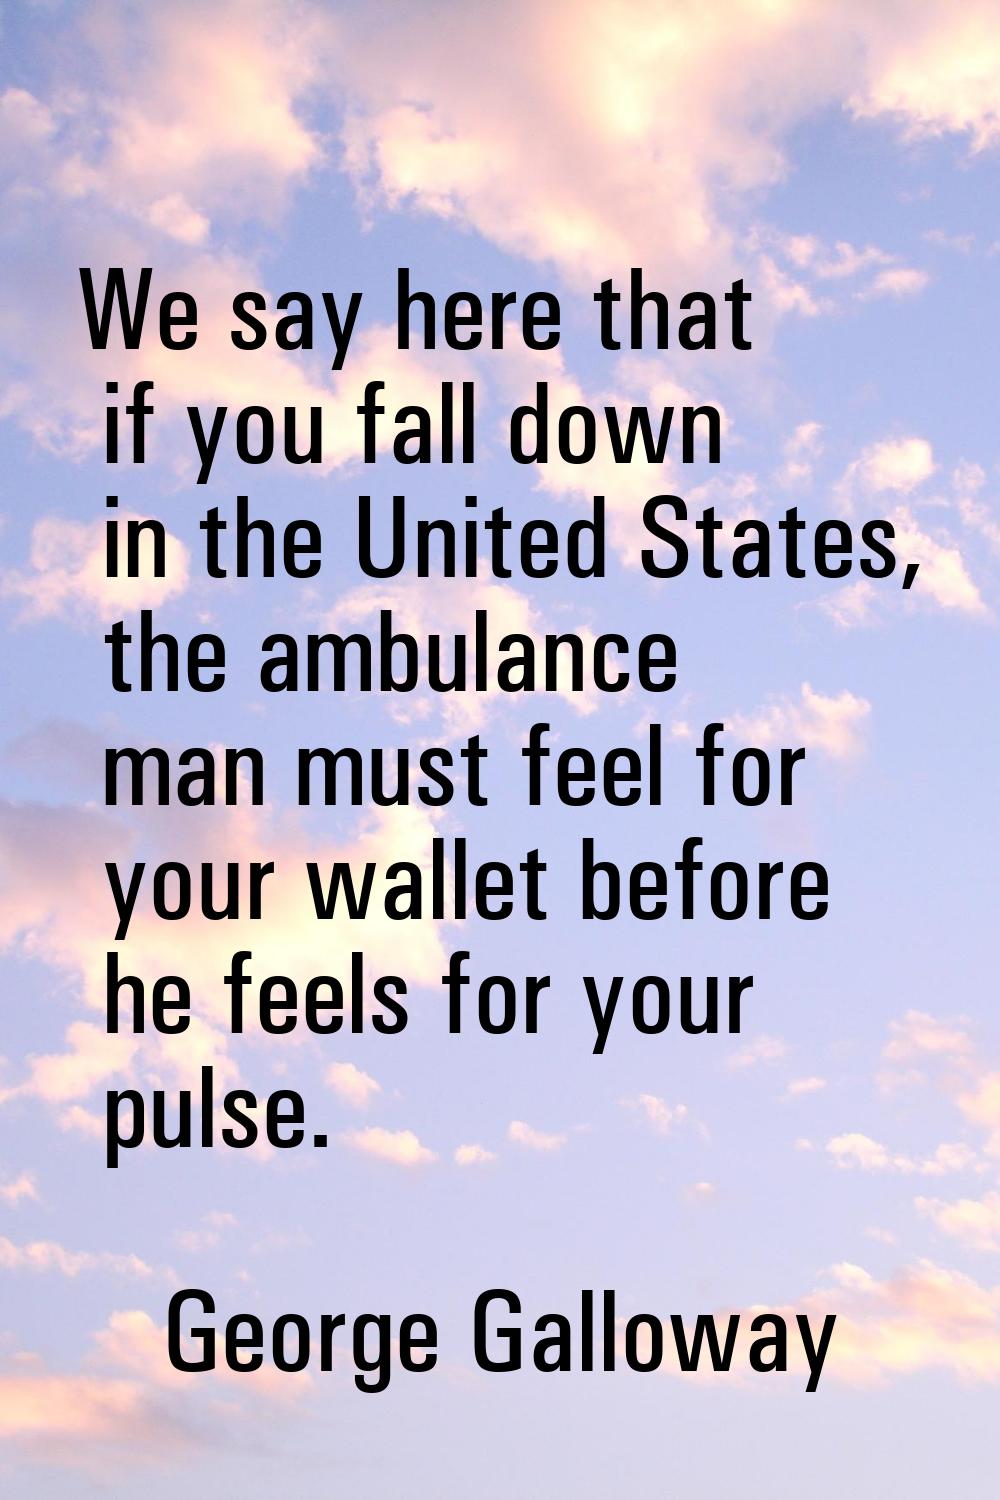 We say here that if you fall down in the United States, the ambulance man must feel for your wallet